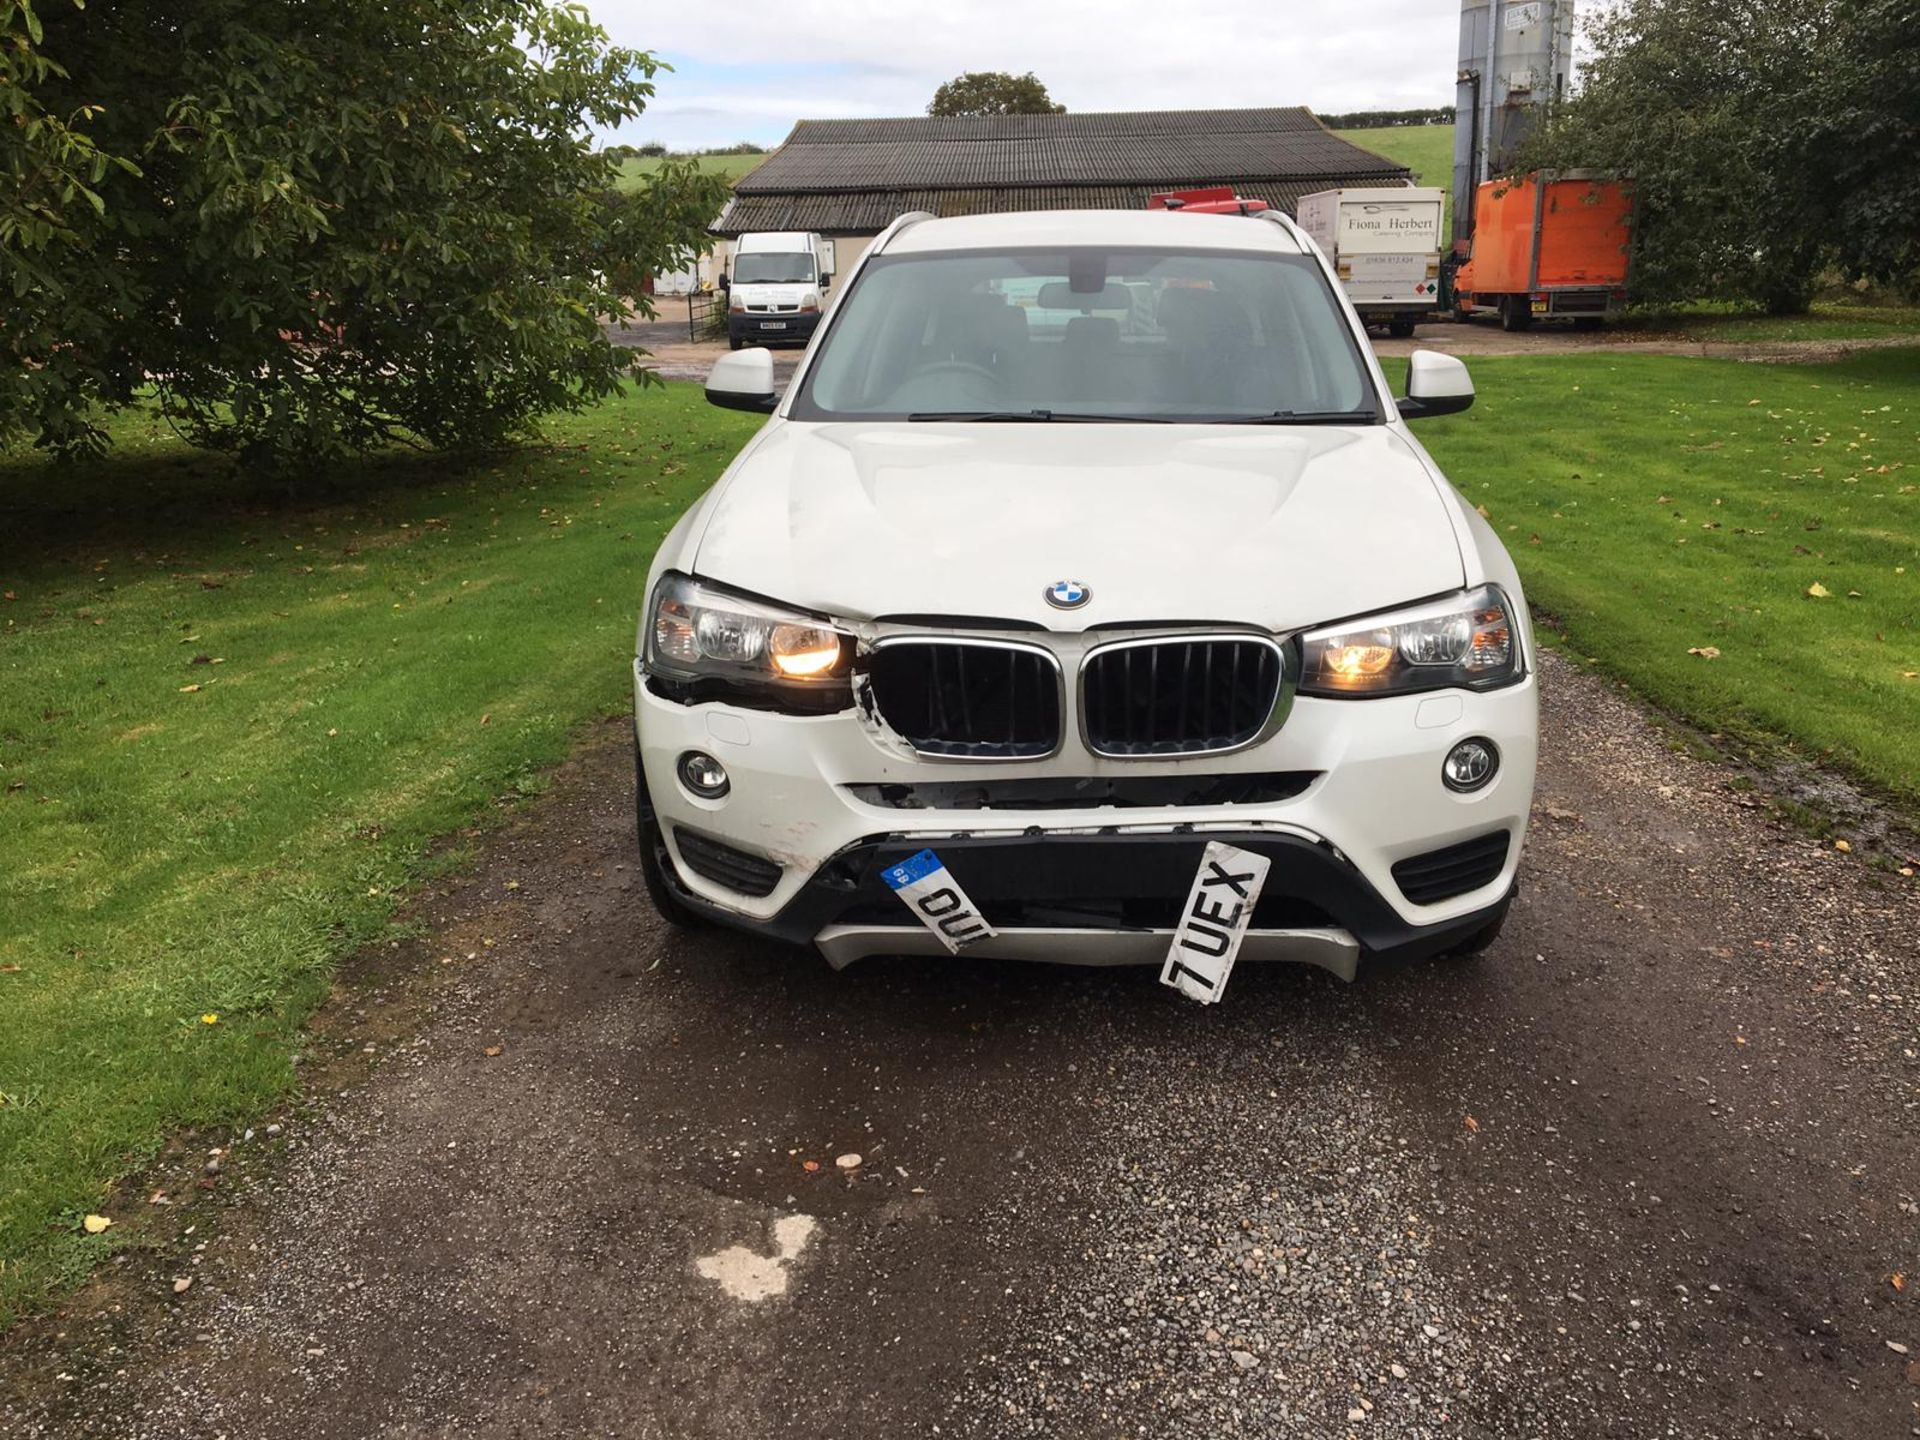 2017/17 REG BMW X3 XDRIVE 20D SE AUTO 2.0 DIESEL WHITE ESTATE, SHOWING 0 FORMER KEEPERS *NO VAT* - Image 2 of 15